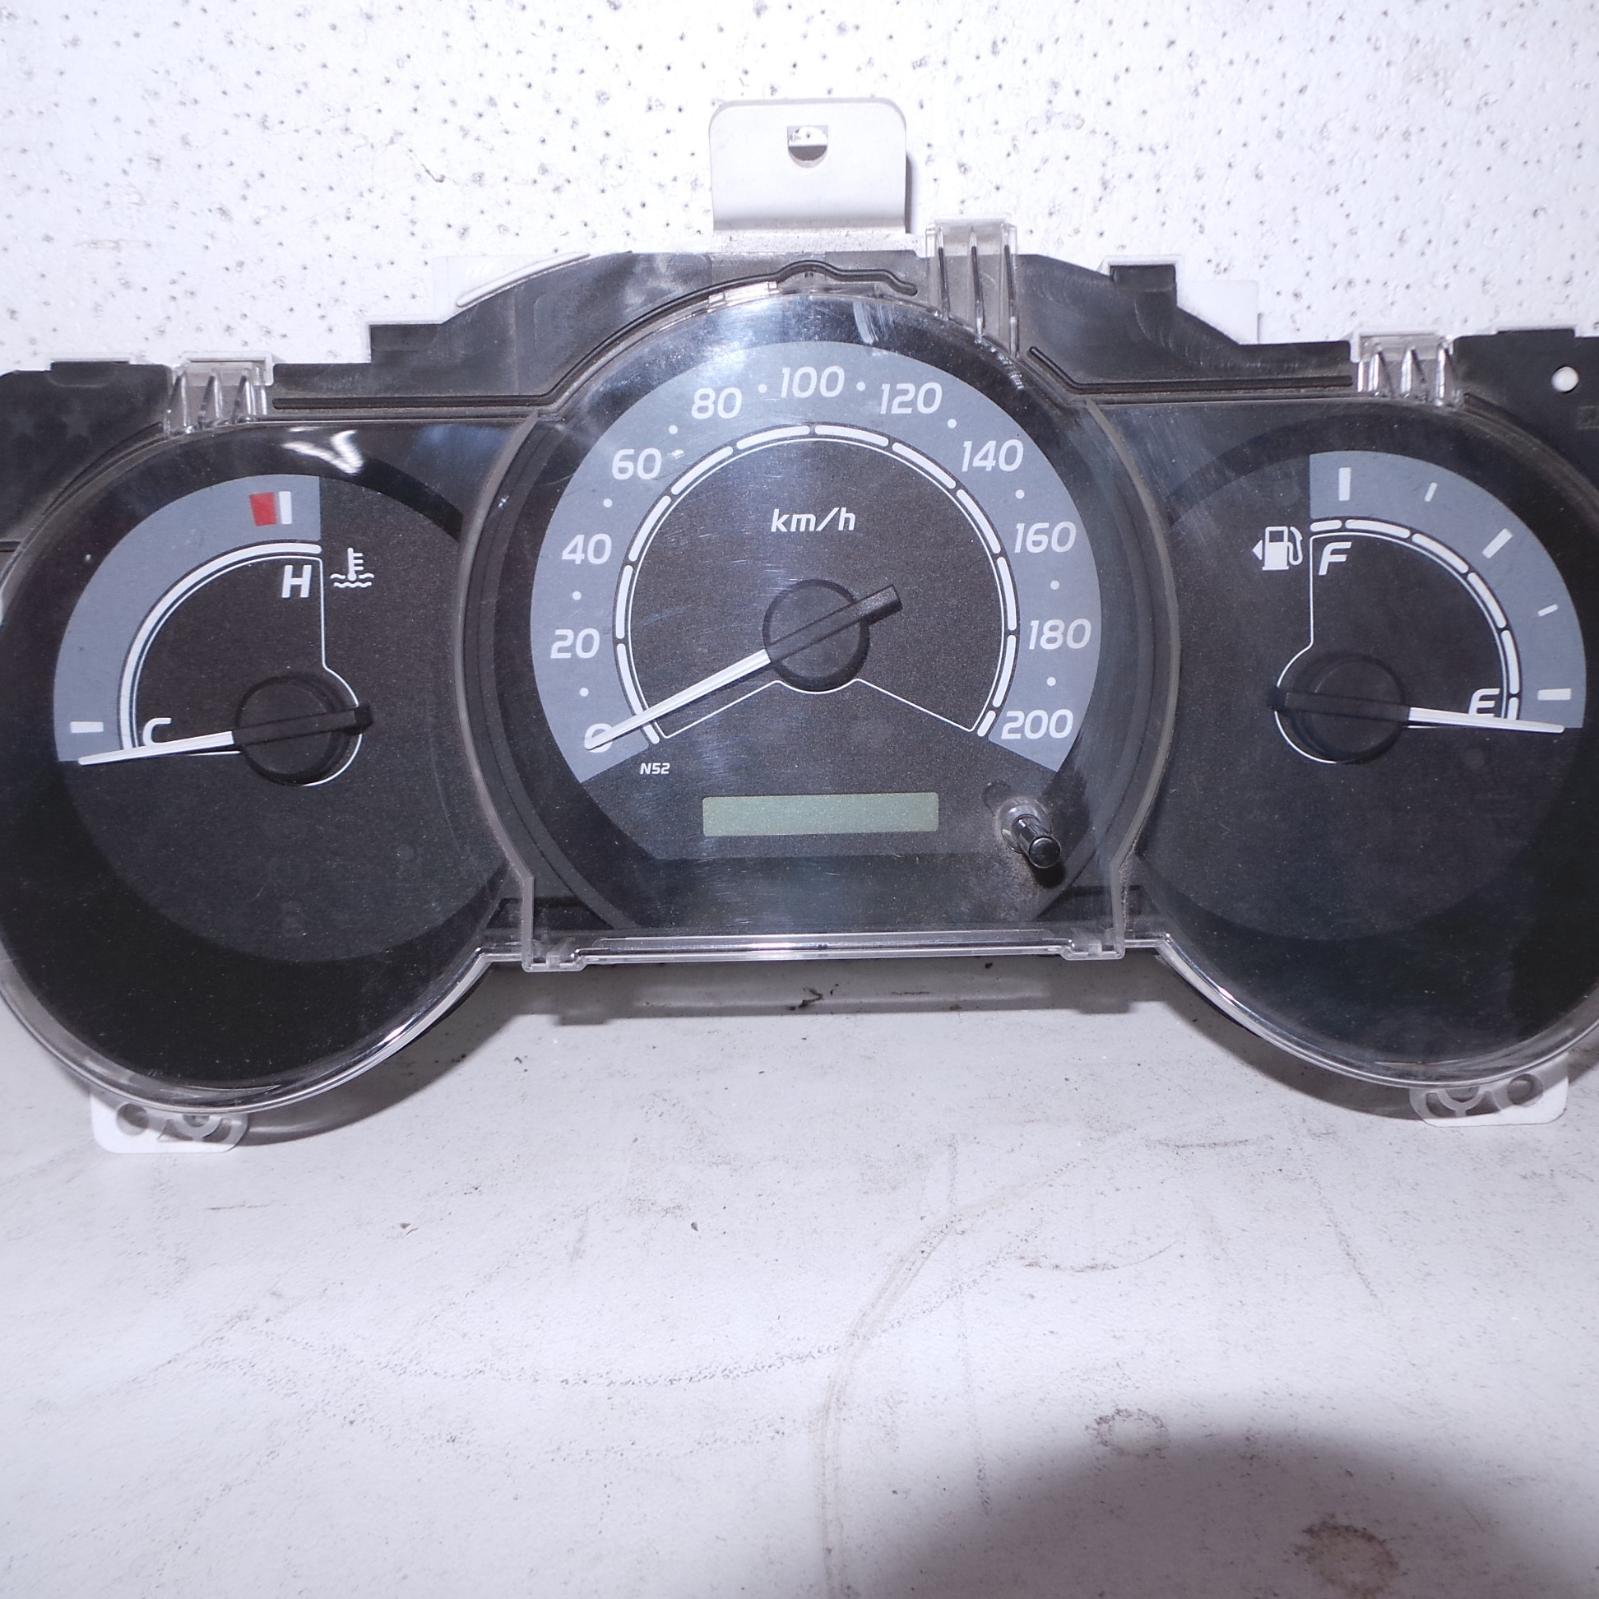 TOYOTA HILUX, Instrument Cluster, PETROL, 2.7, WORKMATE, 02/05-06/11 38340